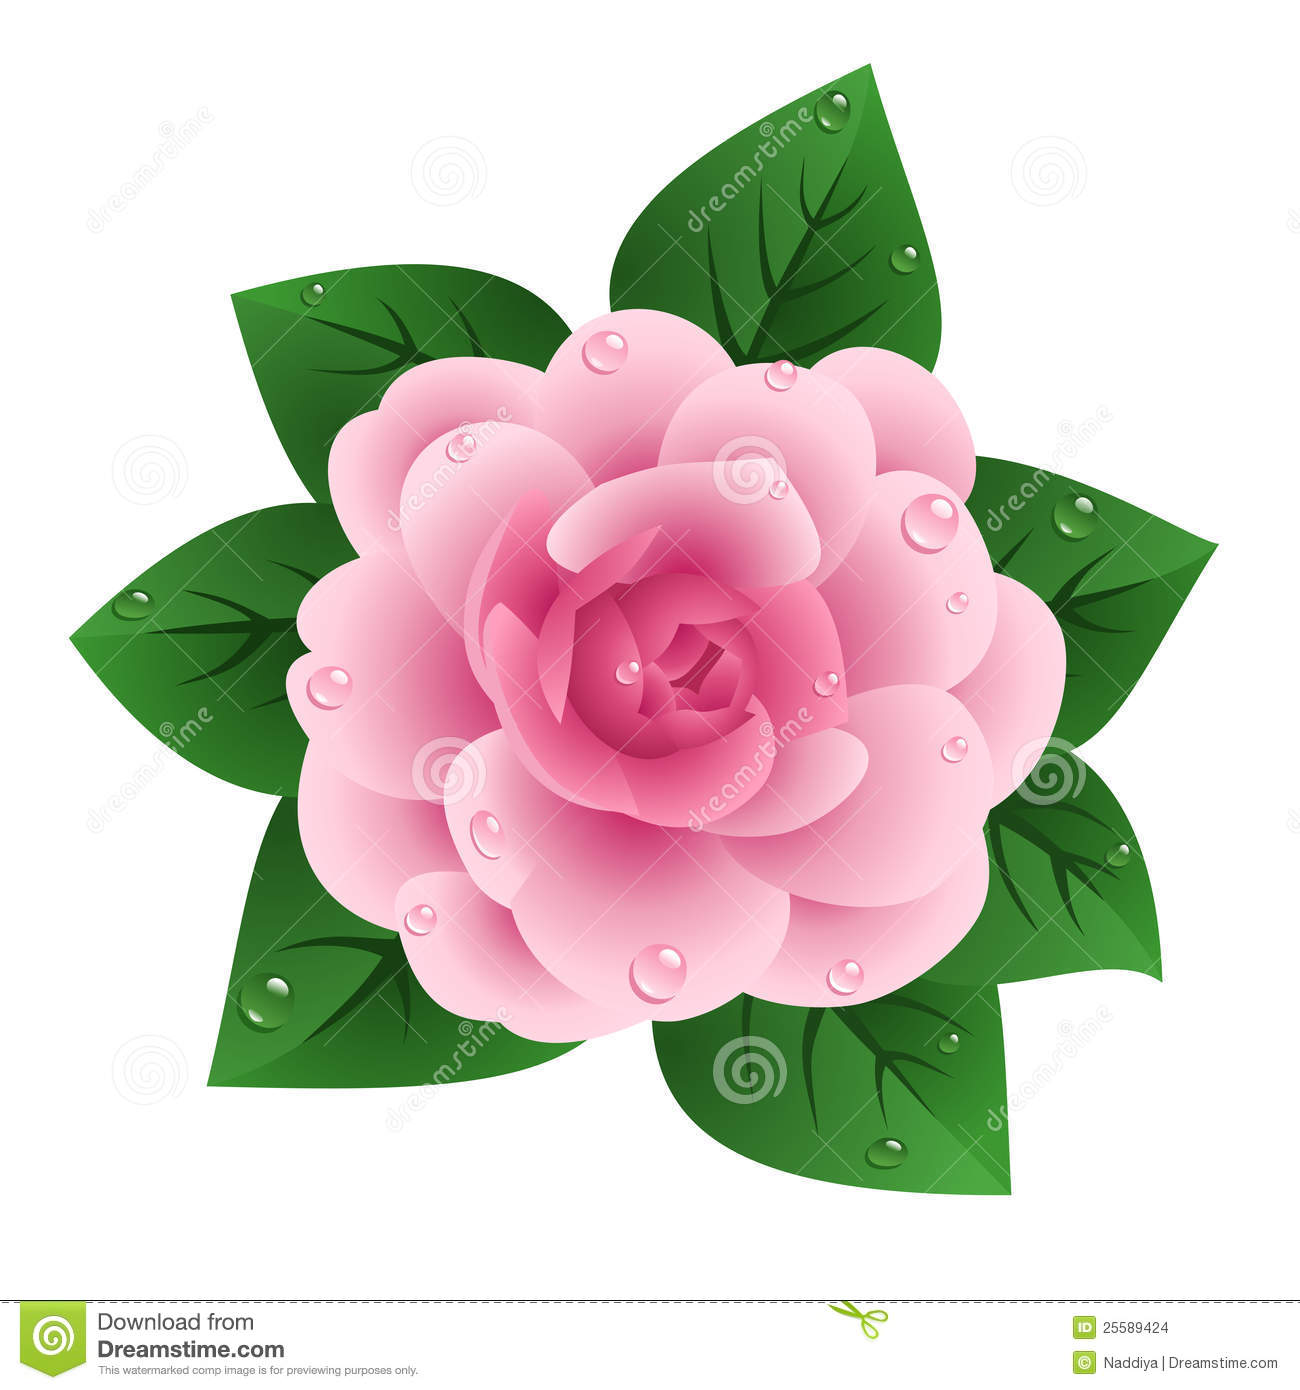 Camellia clipart #20, Download drawings